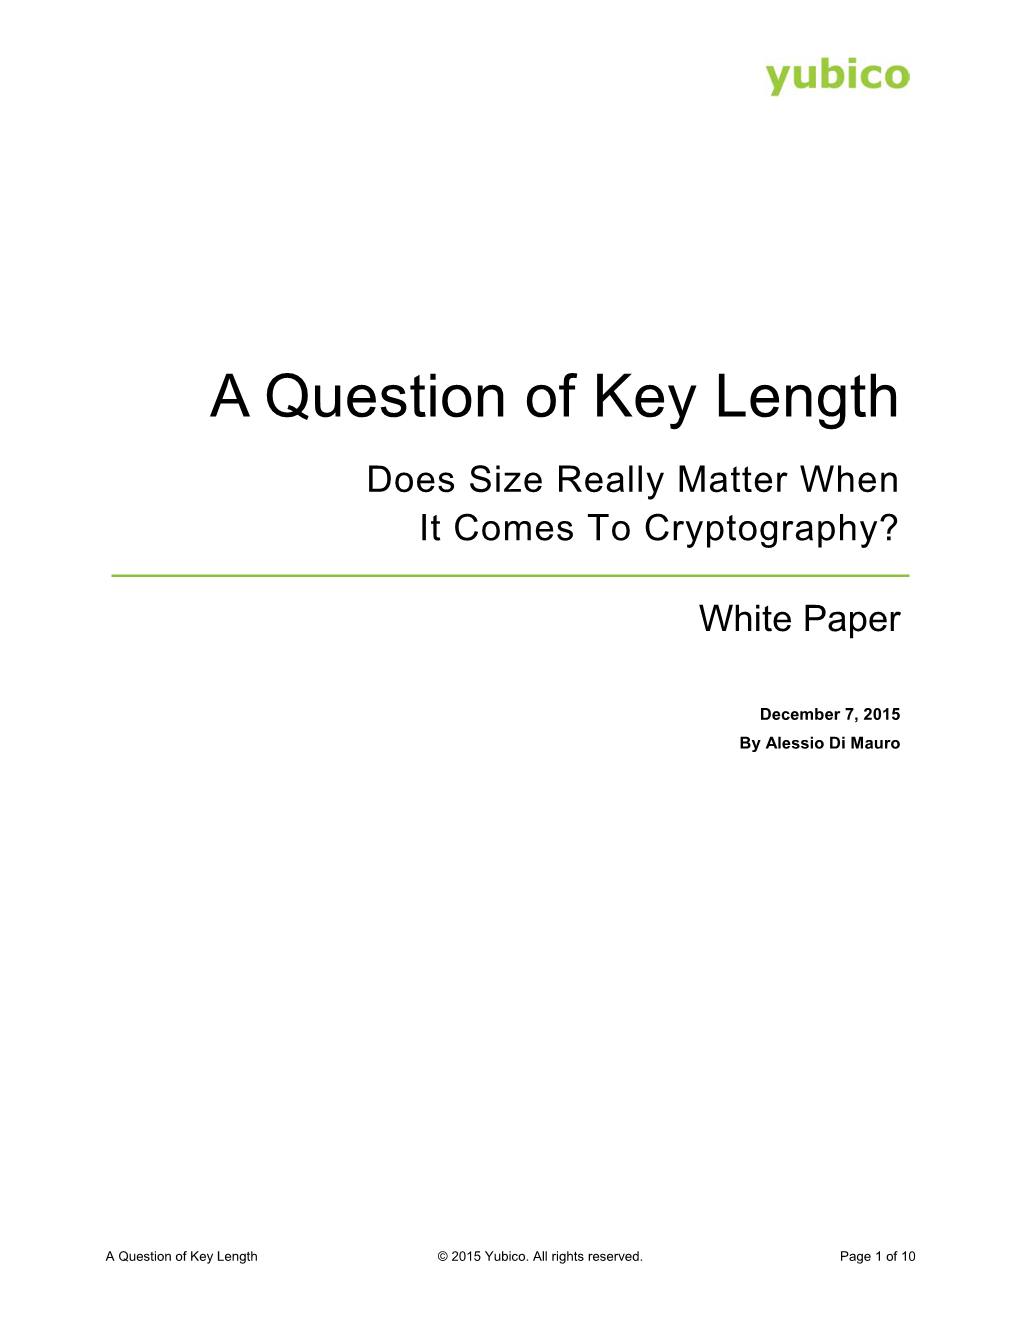 White Paper: a Question of Key Length